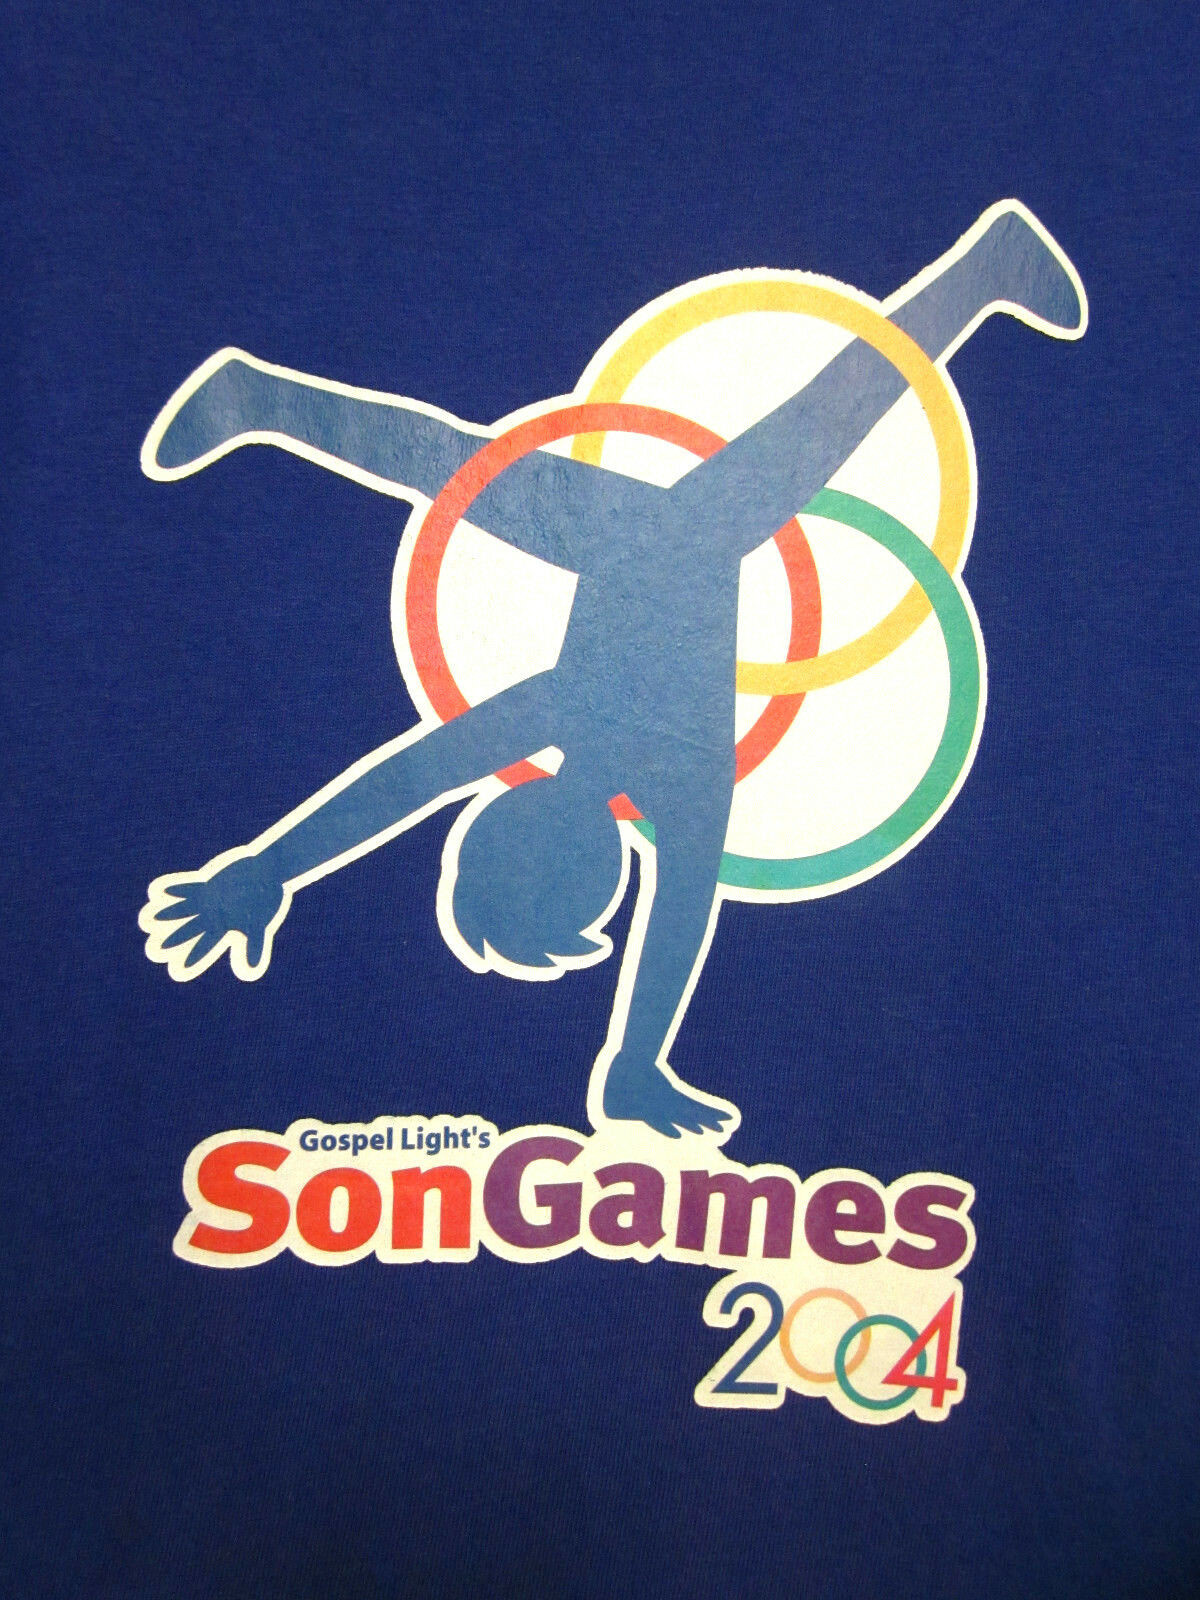 SonGames 2004